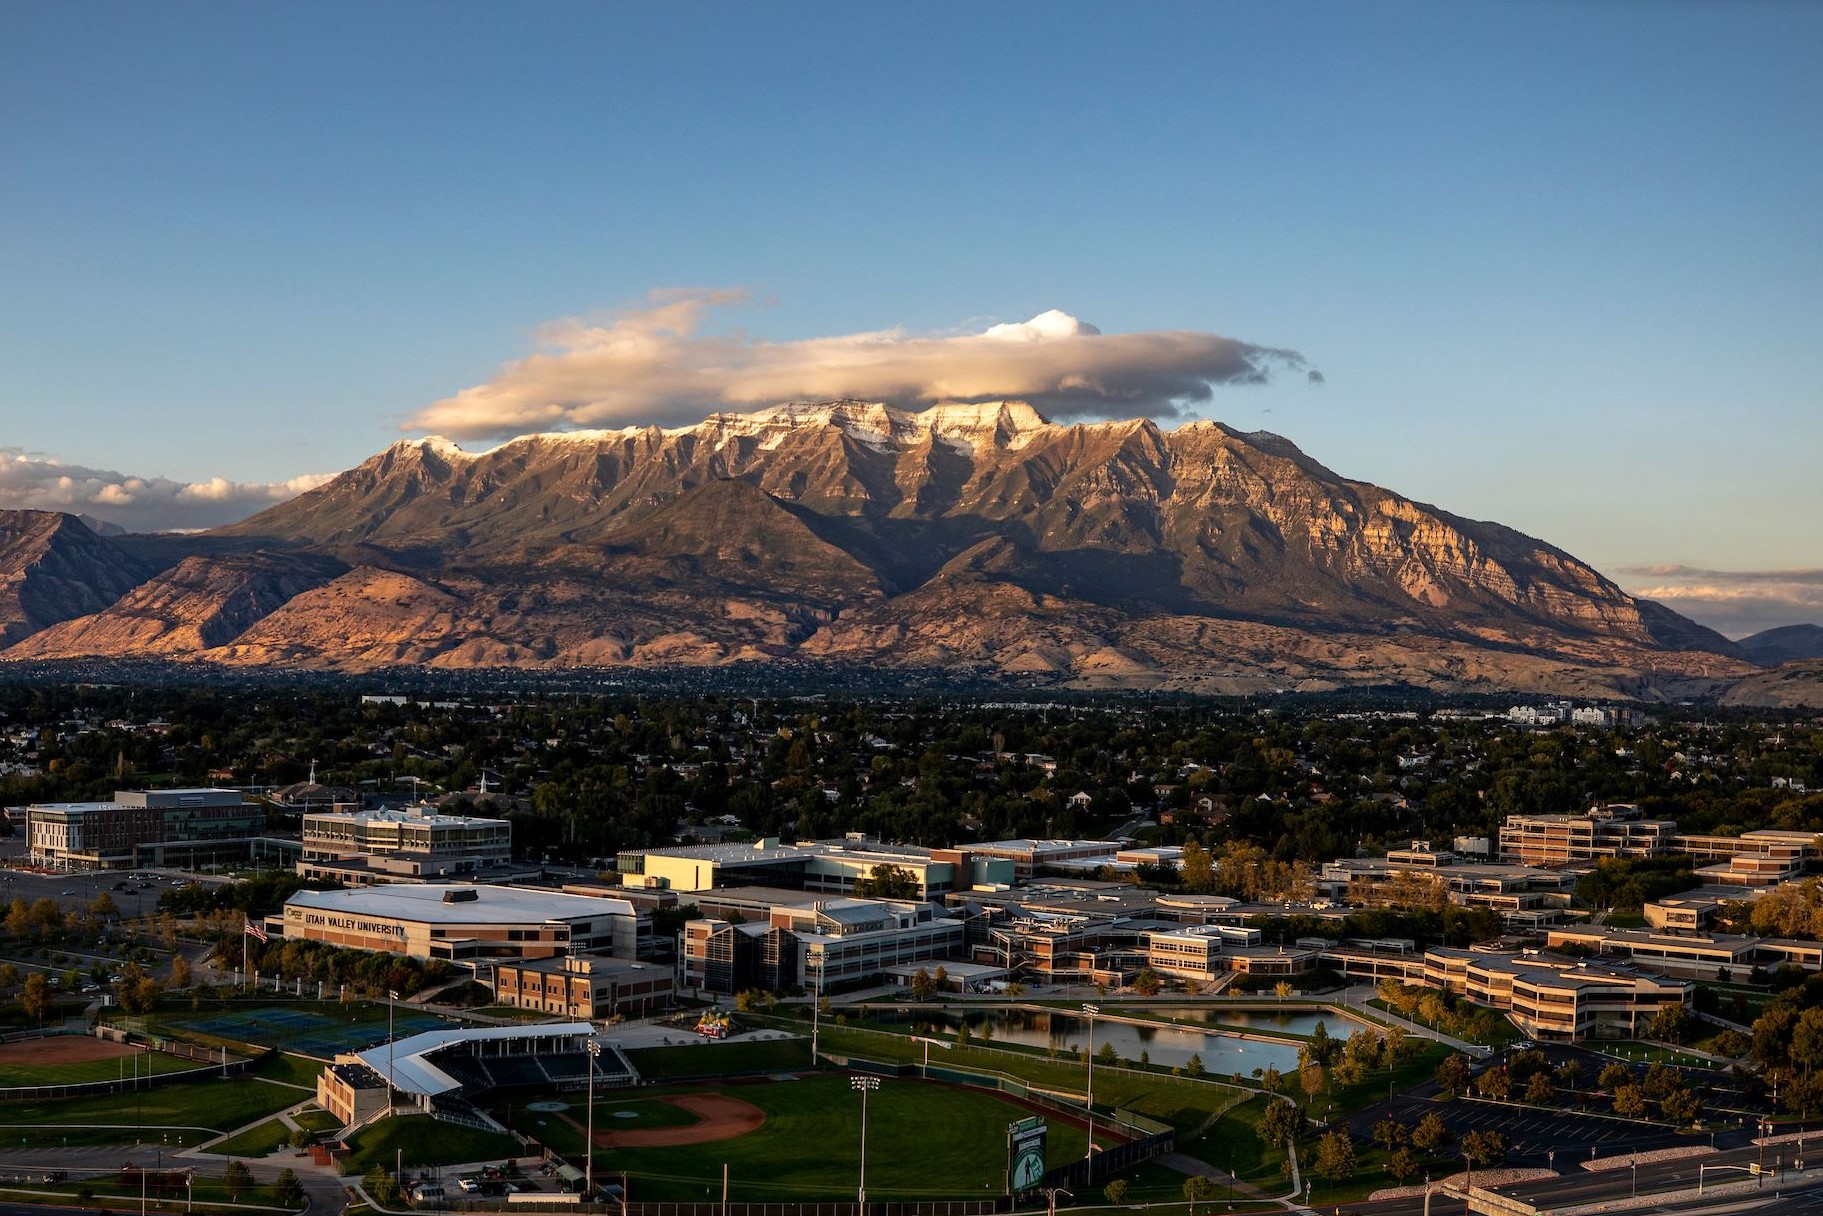 Aerial image of UVU with the City of Orem and Mount Timpanogos in the background